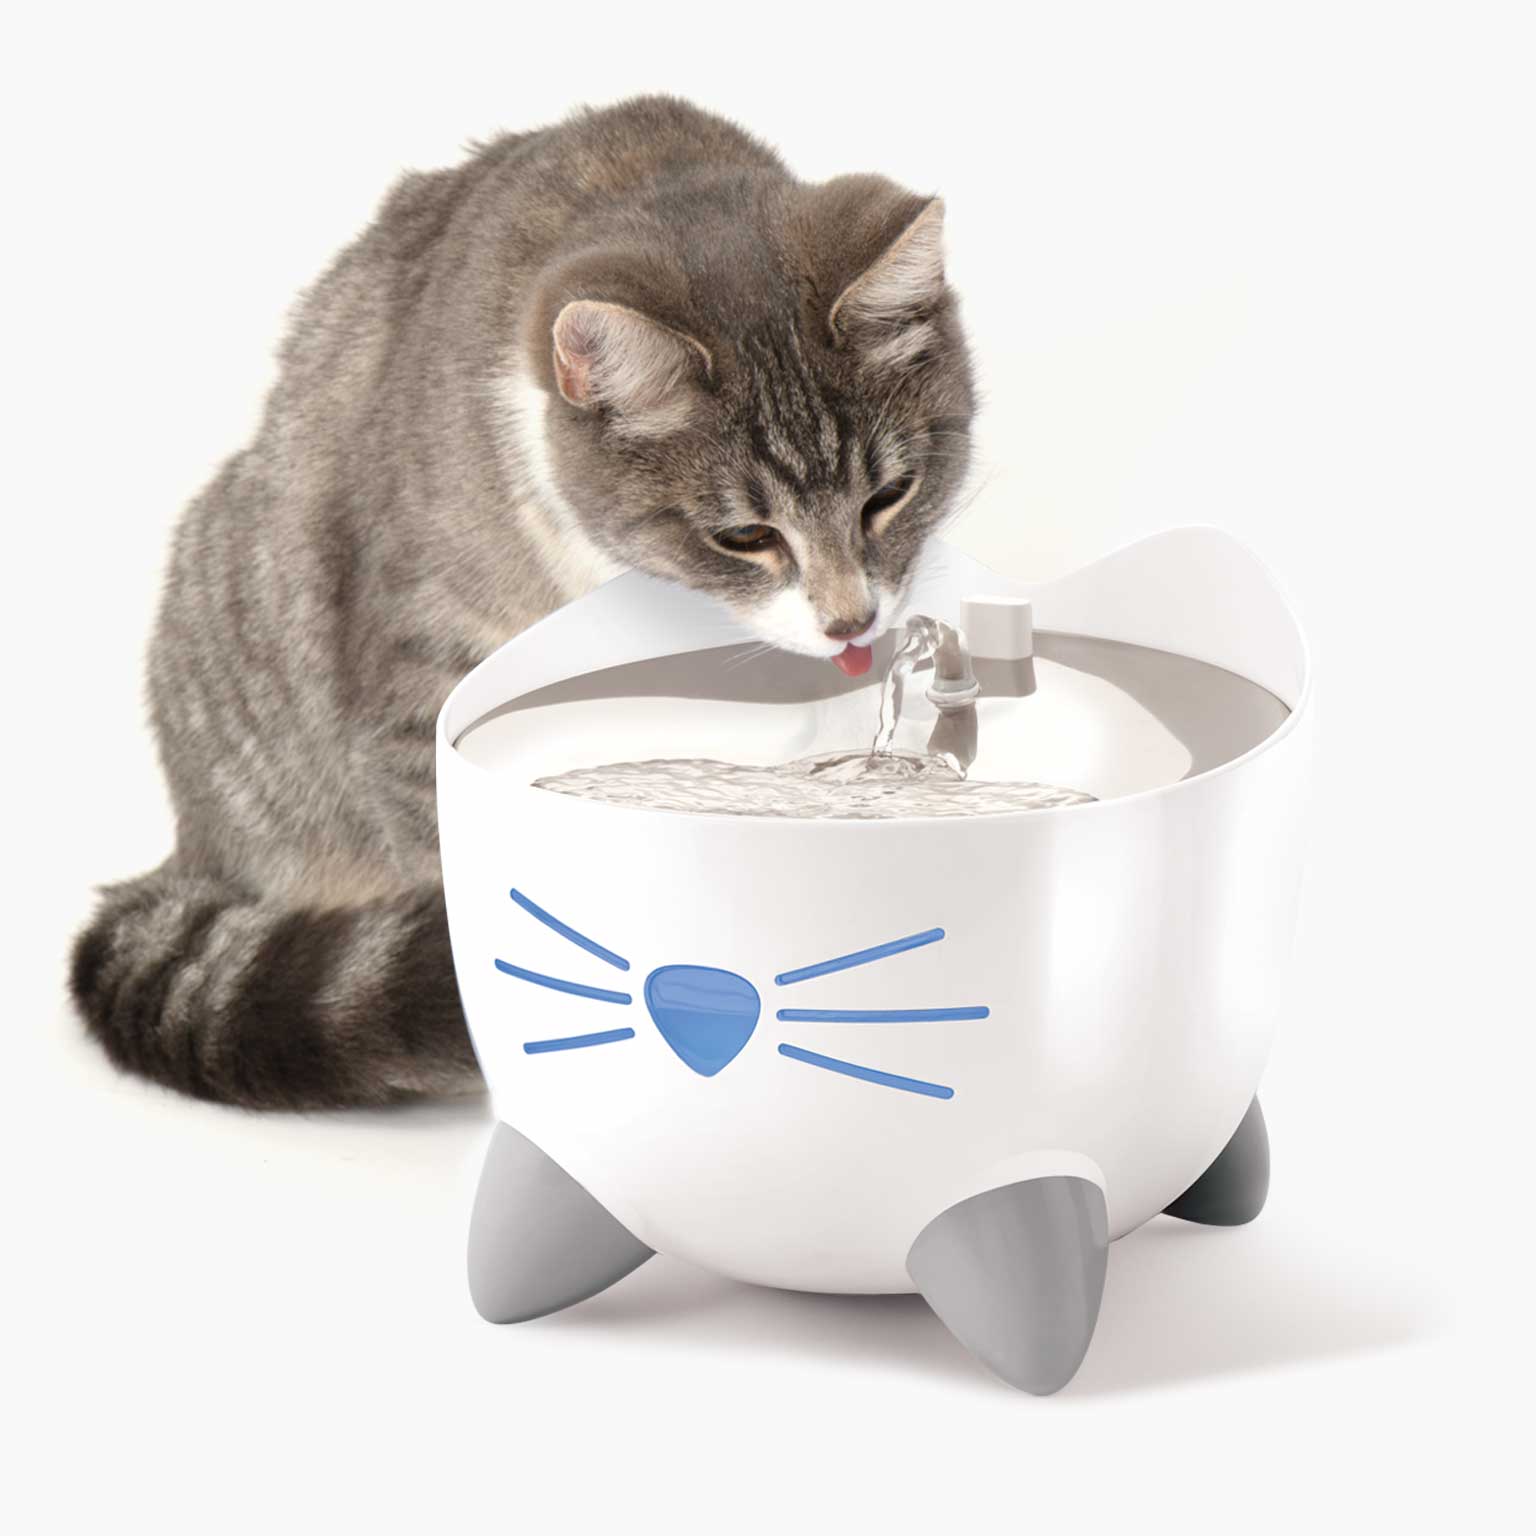 Discover the Catit PIXI Smart Fountain